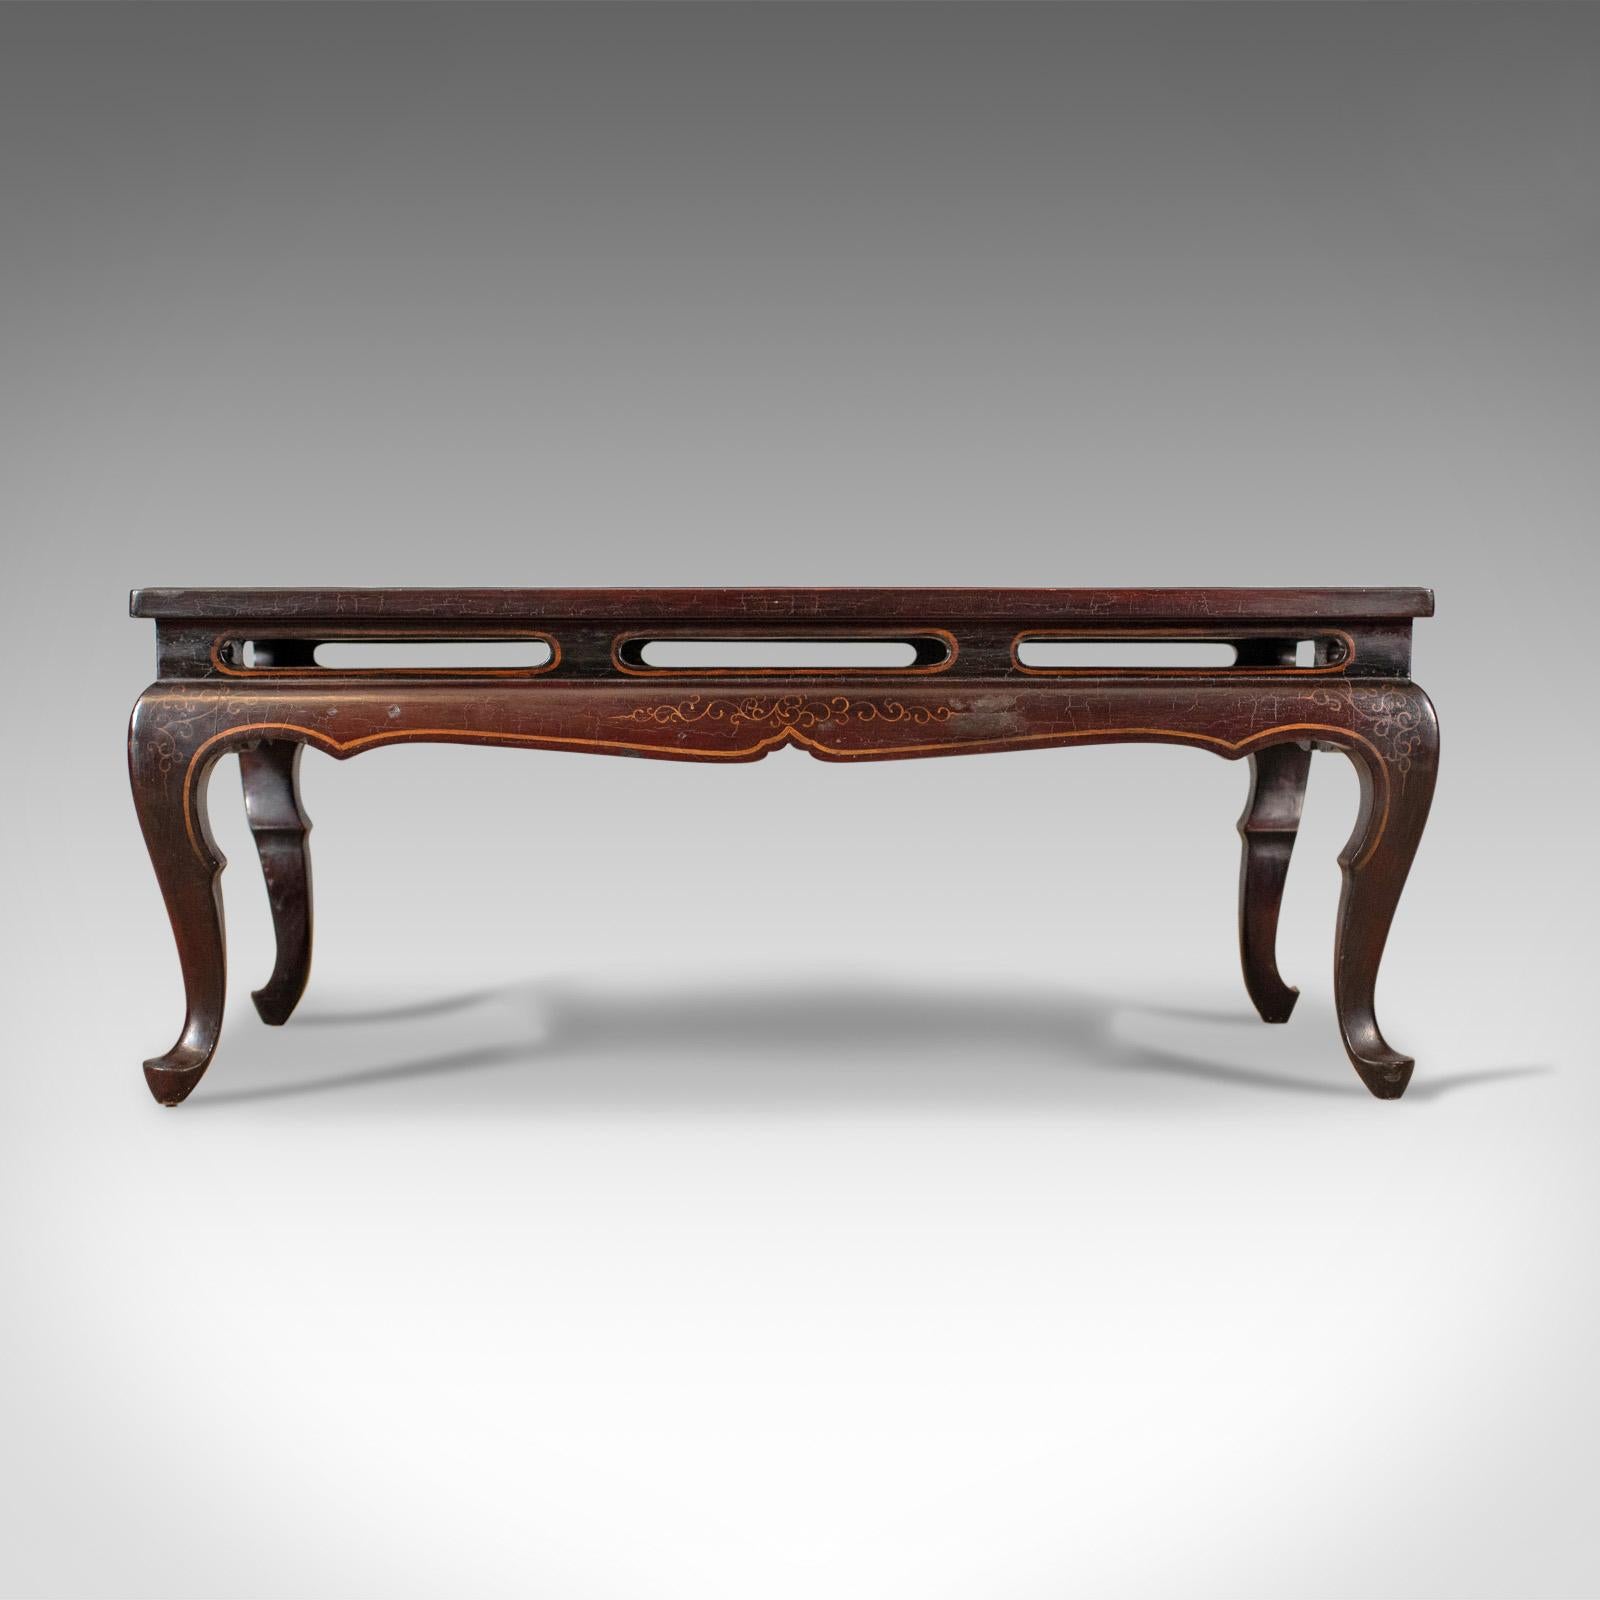 Chinese Export Antique Oriental Coffee Table, Low, Lacquered, Side, Edwardian, circa 1910